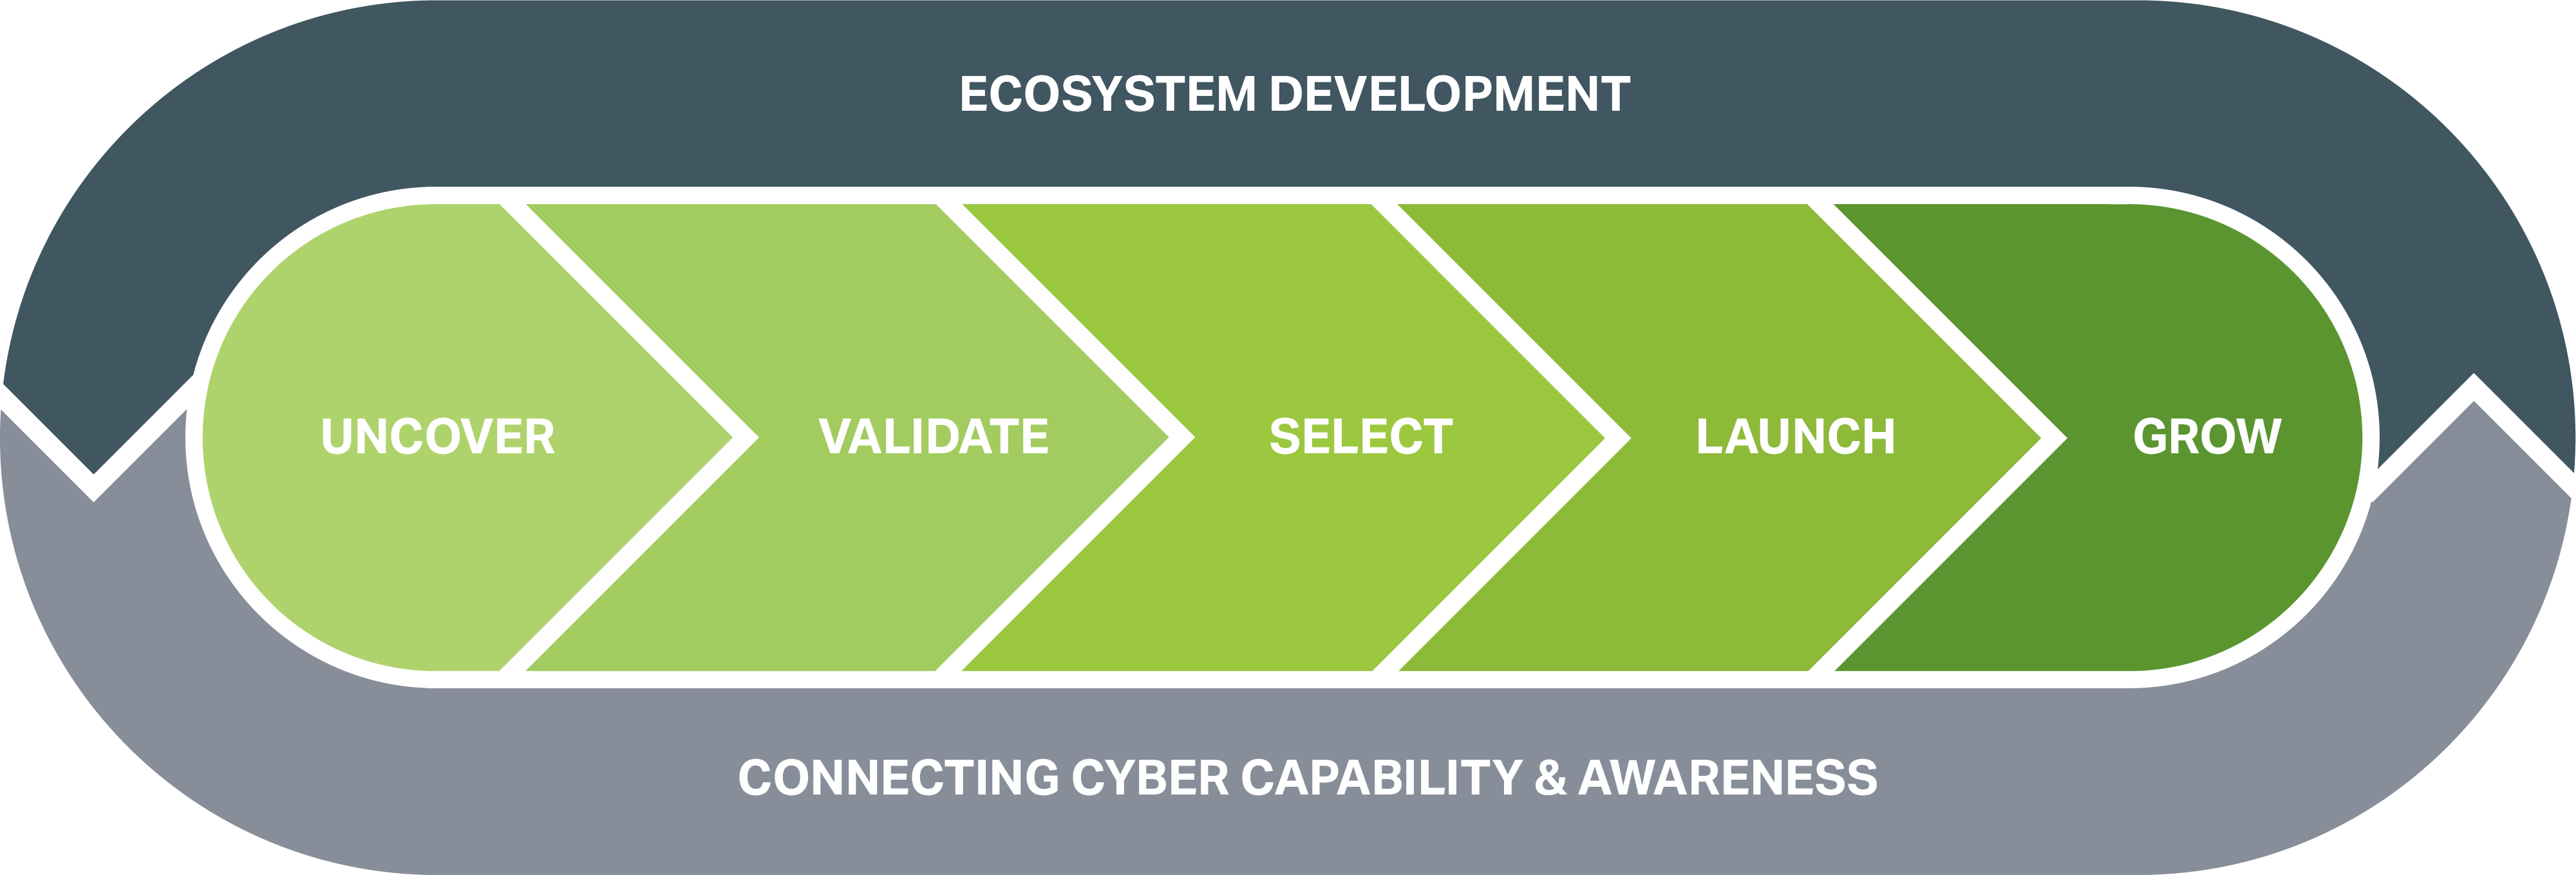  There is a circle around the outside of the diagram made of two cyclical parts named 'Ecosystem development' and 'Connecting cyber capability and awareness'. These are circled around a linear row of linked shapes that are named: uncover, validate, select, launch and grow. 